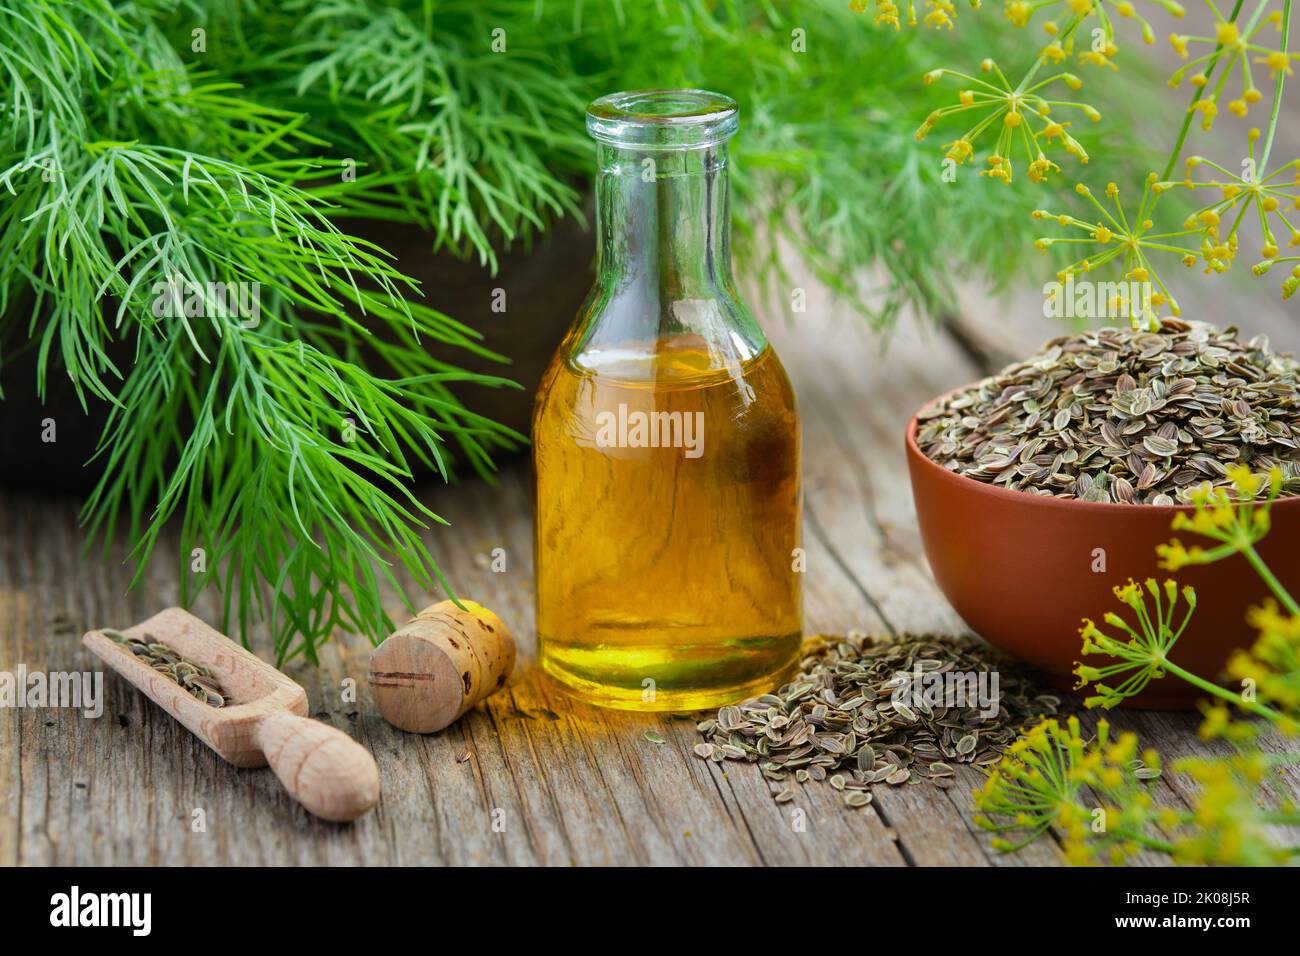 Bottle of dill seeds oil, bunch of fresh green dill and bowl of dried fennel seeds on wooden board. Alternative herbal medicine. Useful seasoning for Stock Photo